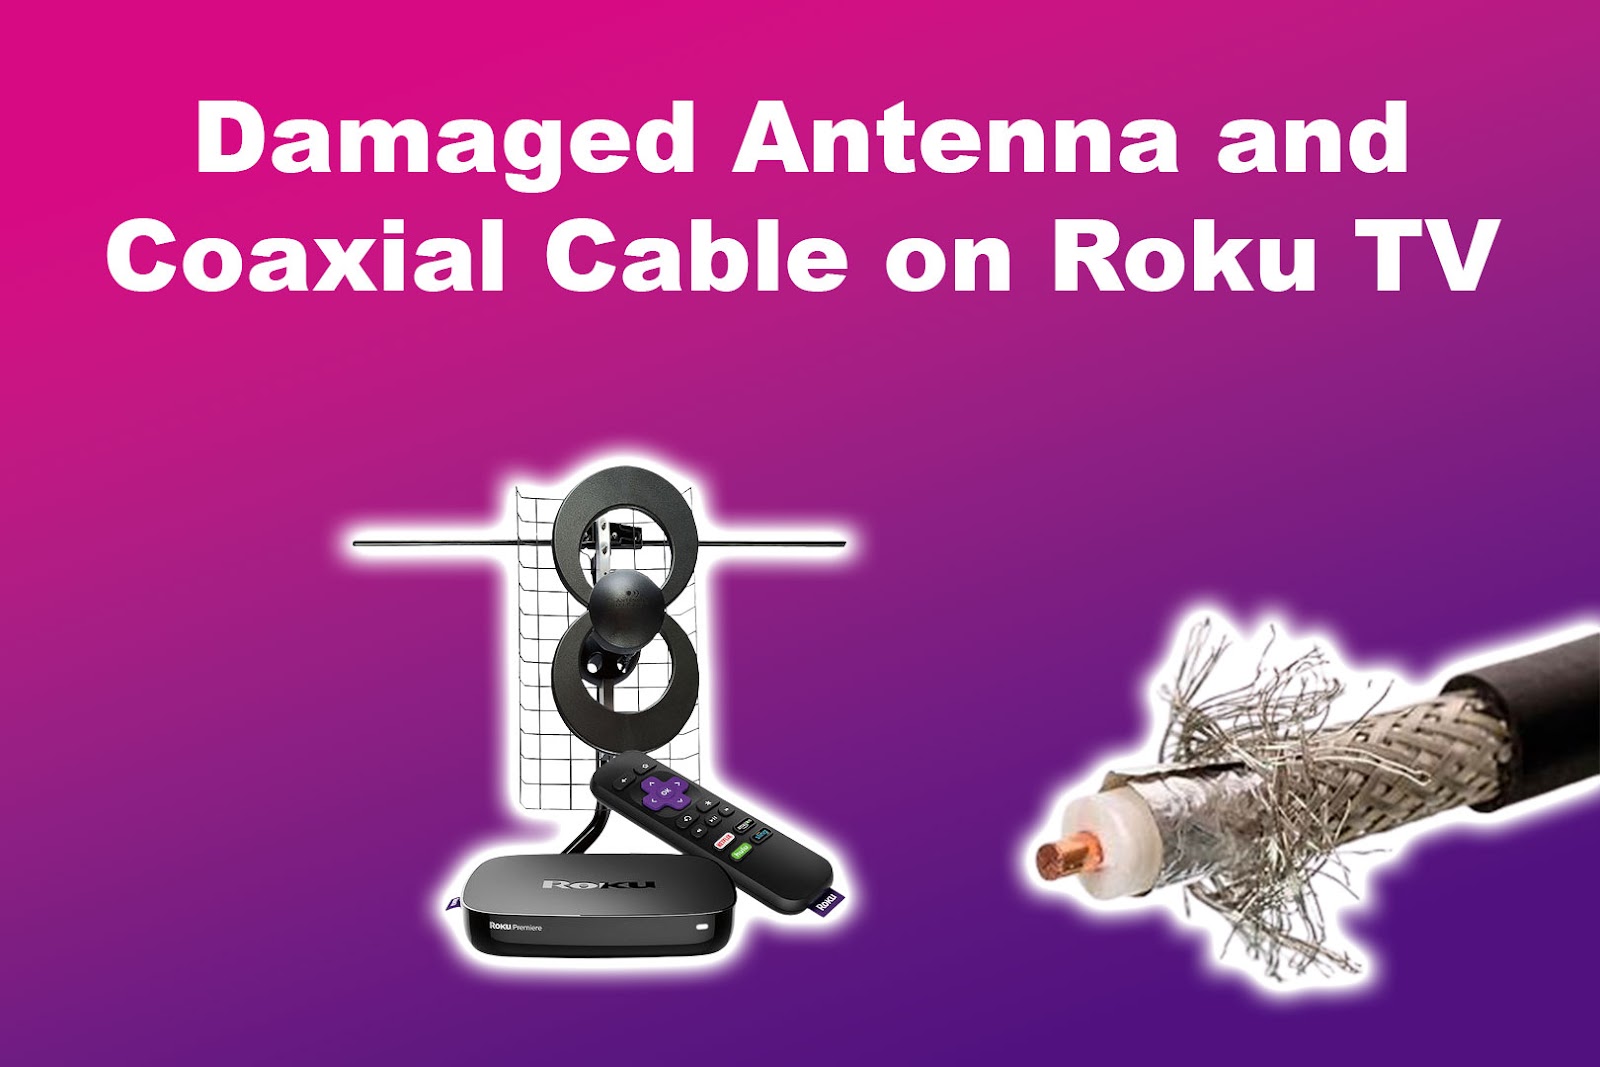 Damaged Antenna and Coaxial Cable on Roku TV